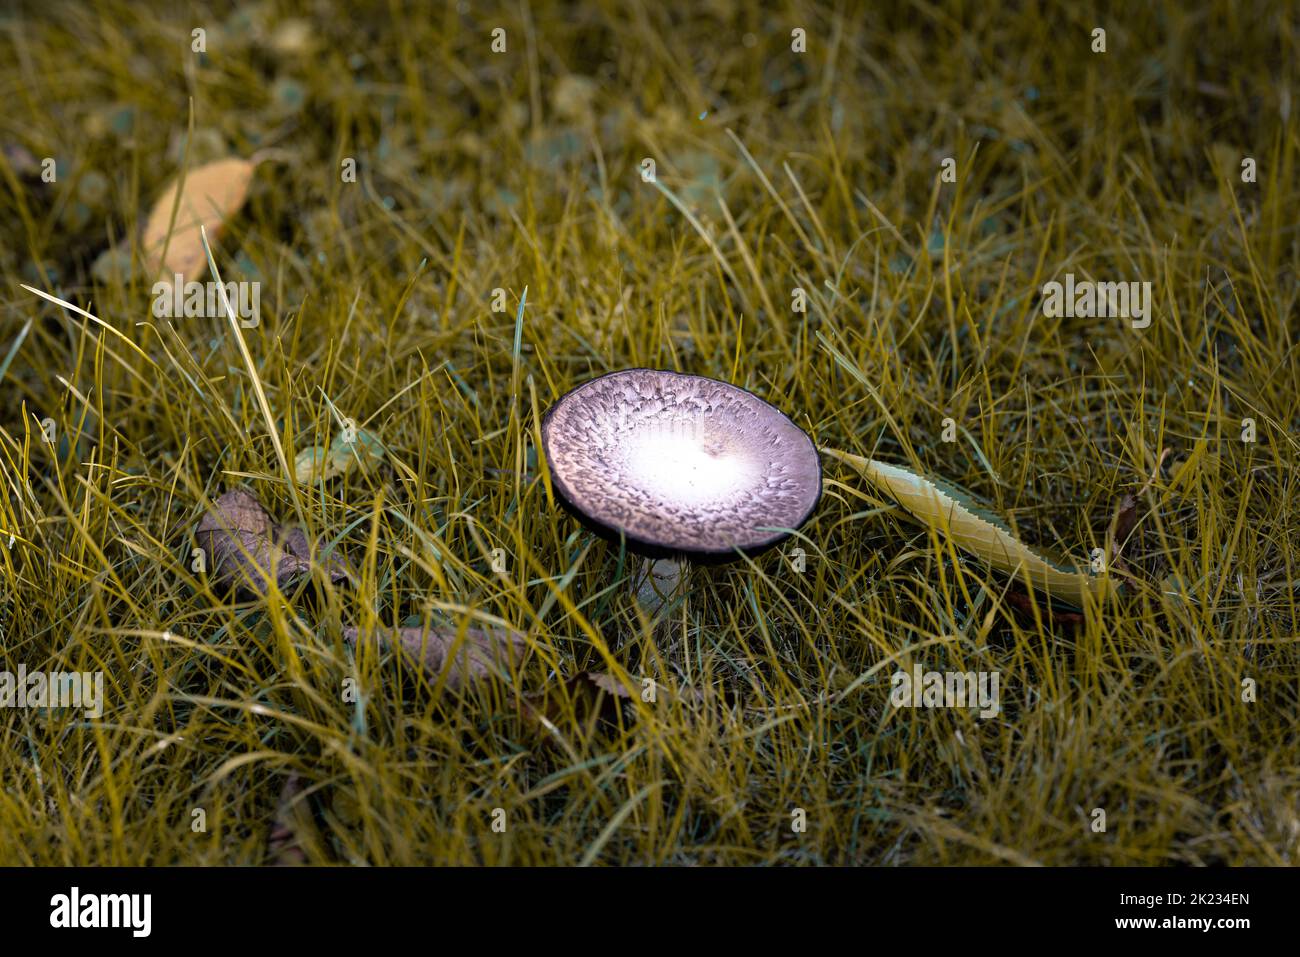 Close up of a mushroom in grass in autumn colors Stock Photo